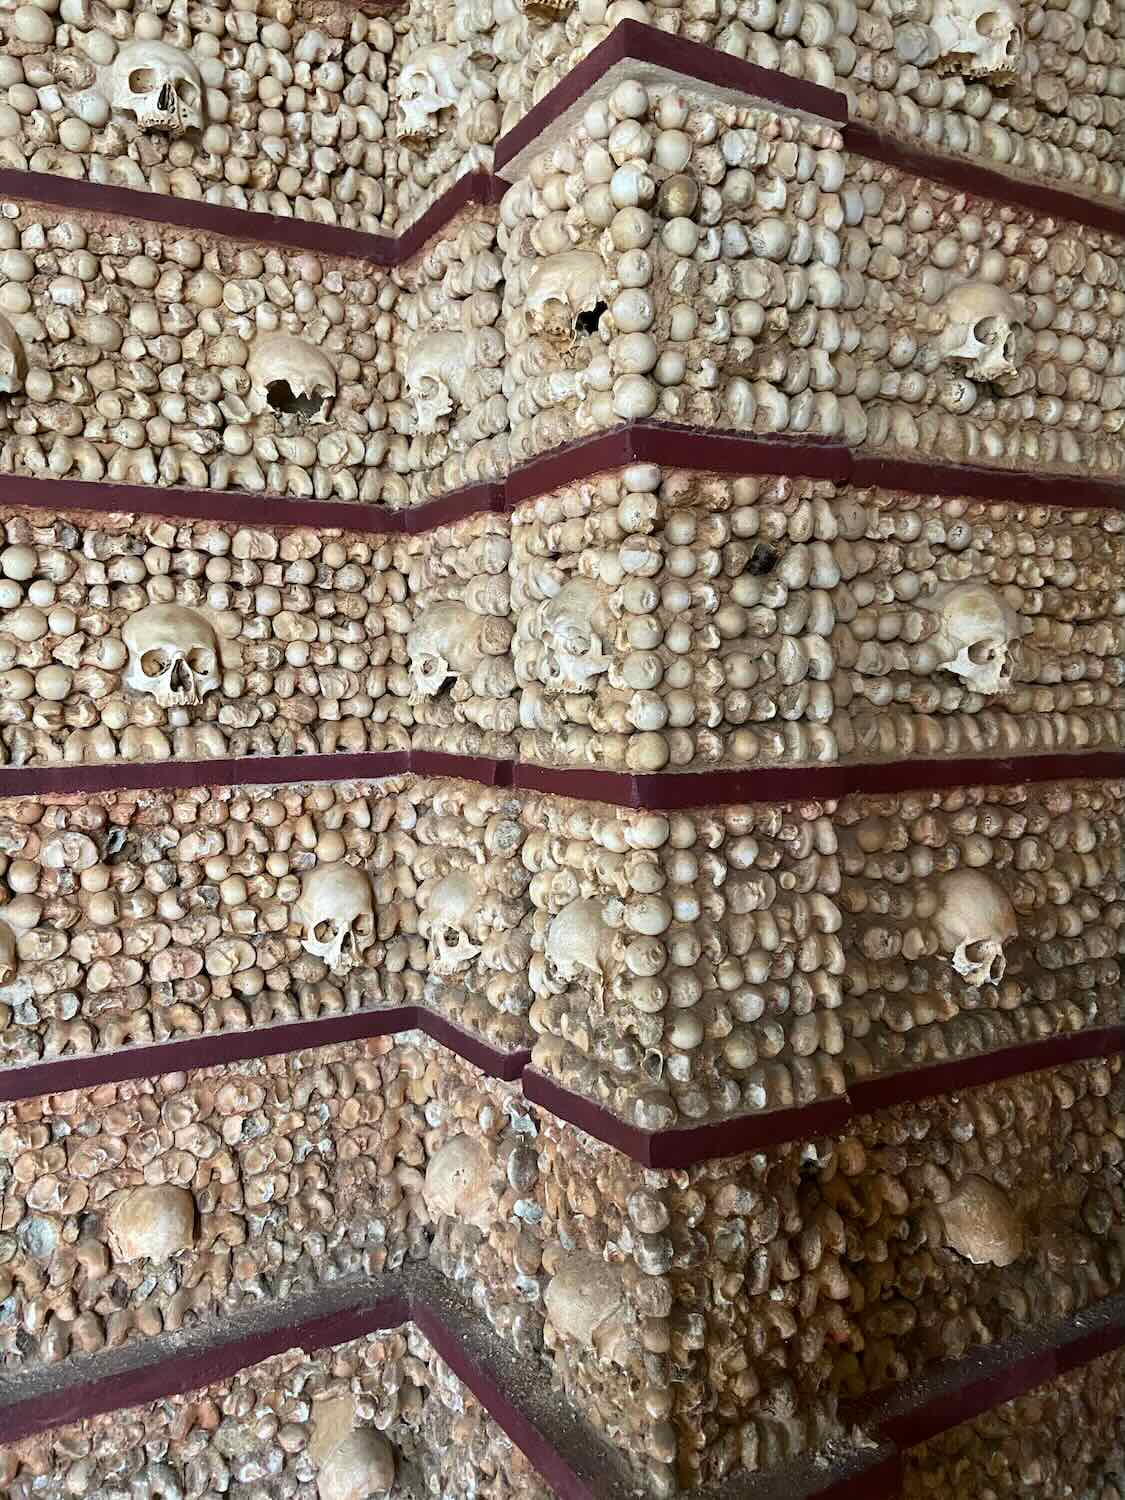 Interior detail of the Capela dos Ossos (Chapel of Bones) in Faro, walls adorned with a geometric pattern of human skulls and bones, creating a haunting yet historical atmosphere.